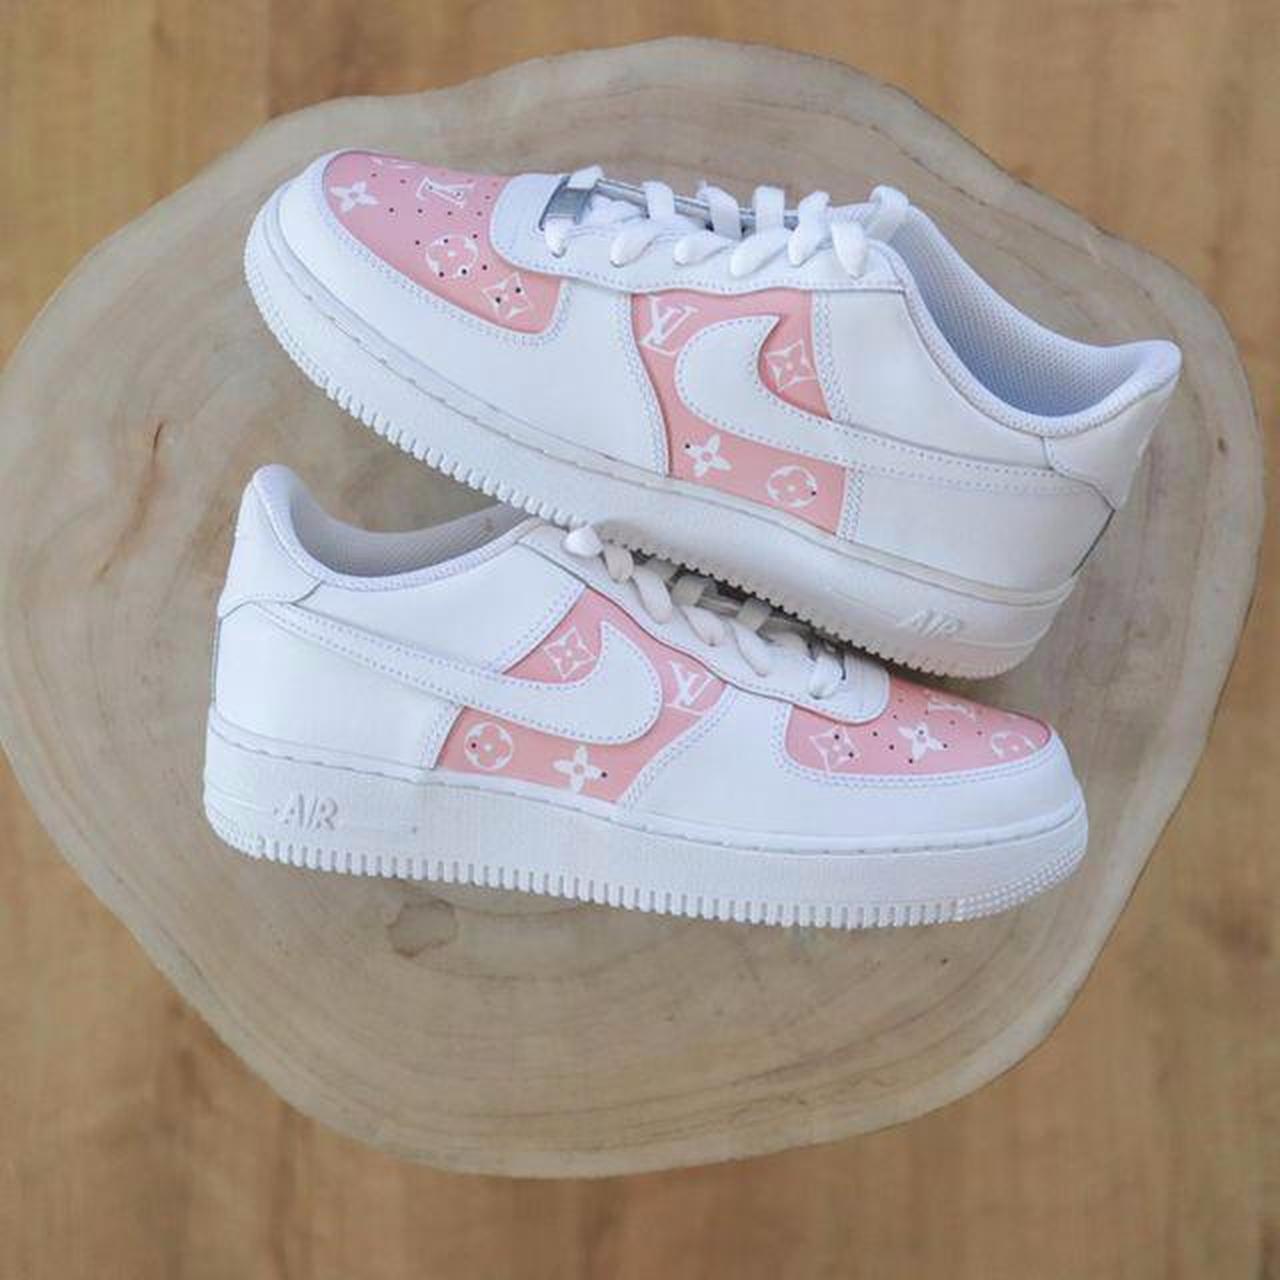 Air force 1 Louis Vuitton custom * NOT MY PICTURE